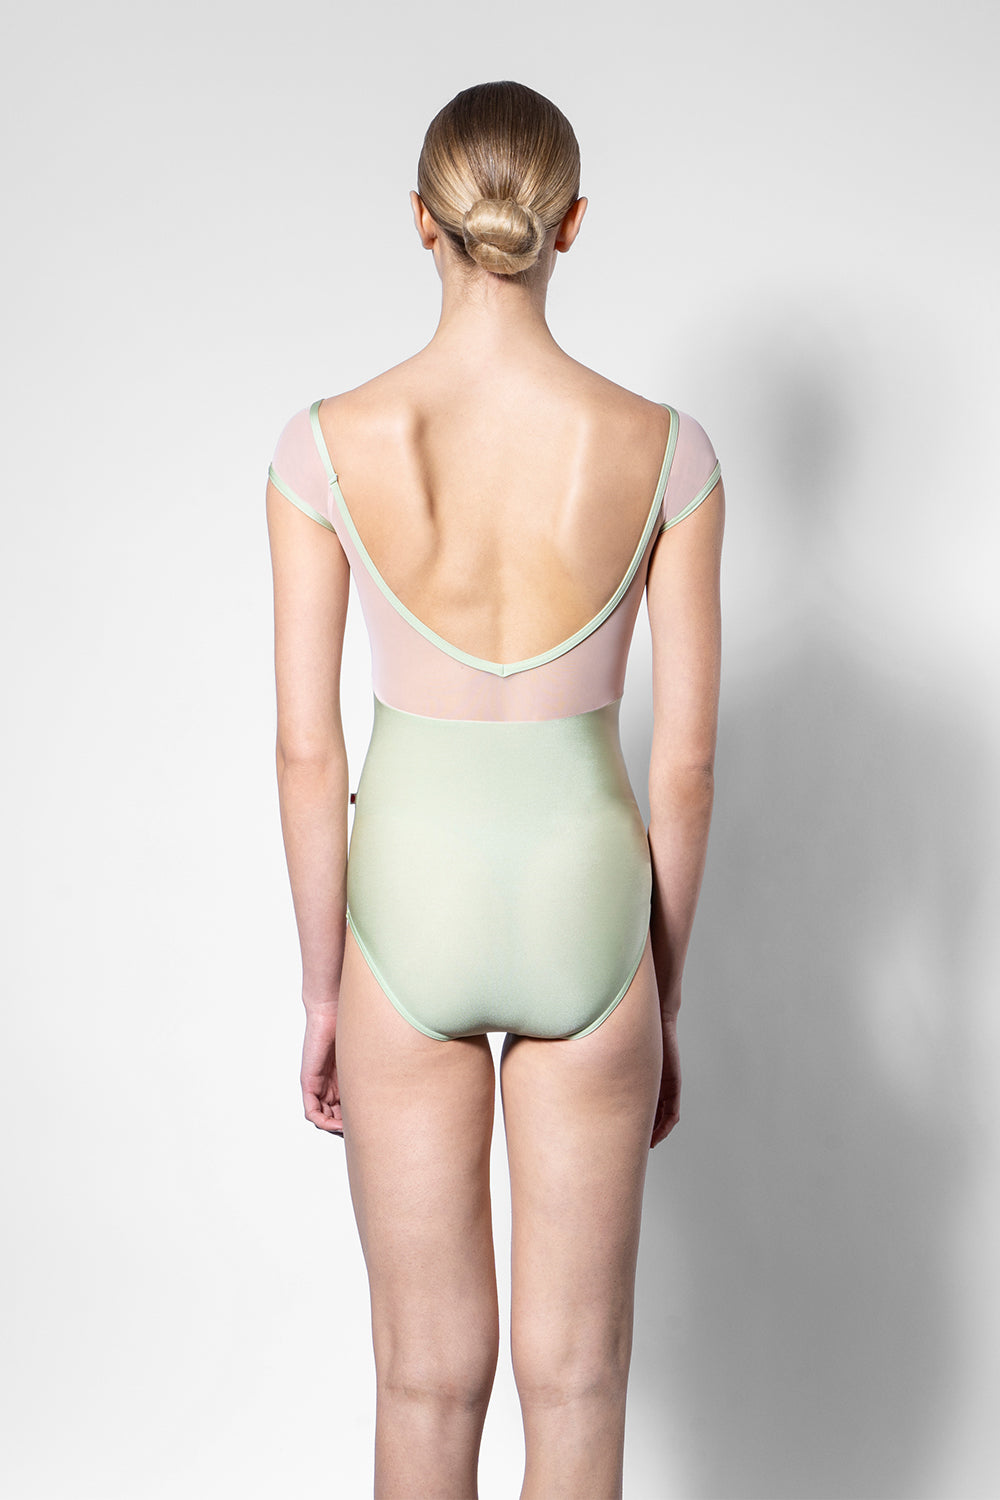 Elli leotard in N-Ginko body color with V-Blush top color, Mesh Blush cap sleeves and N-Ginko trim color